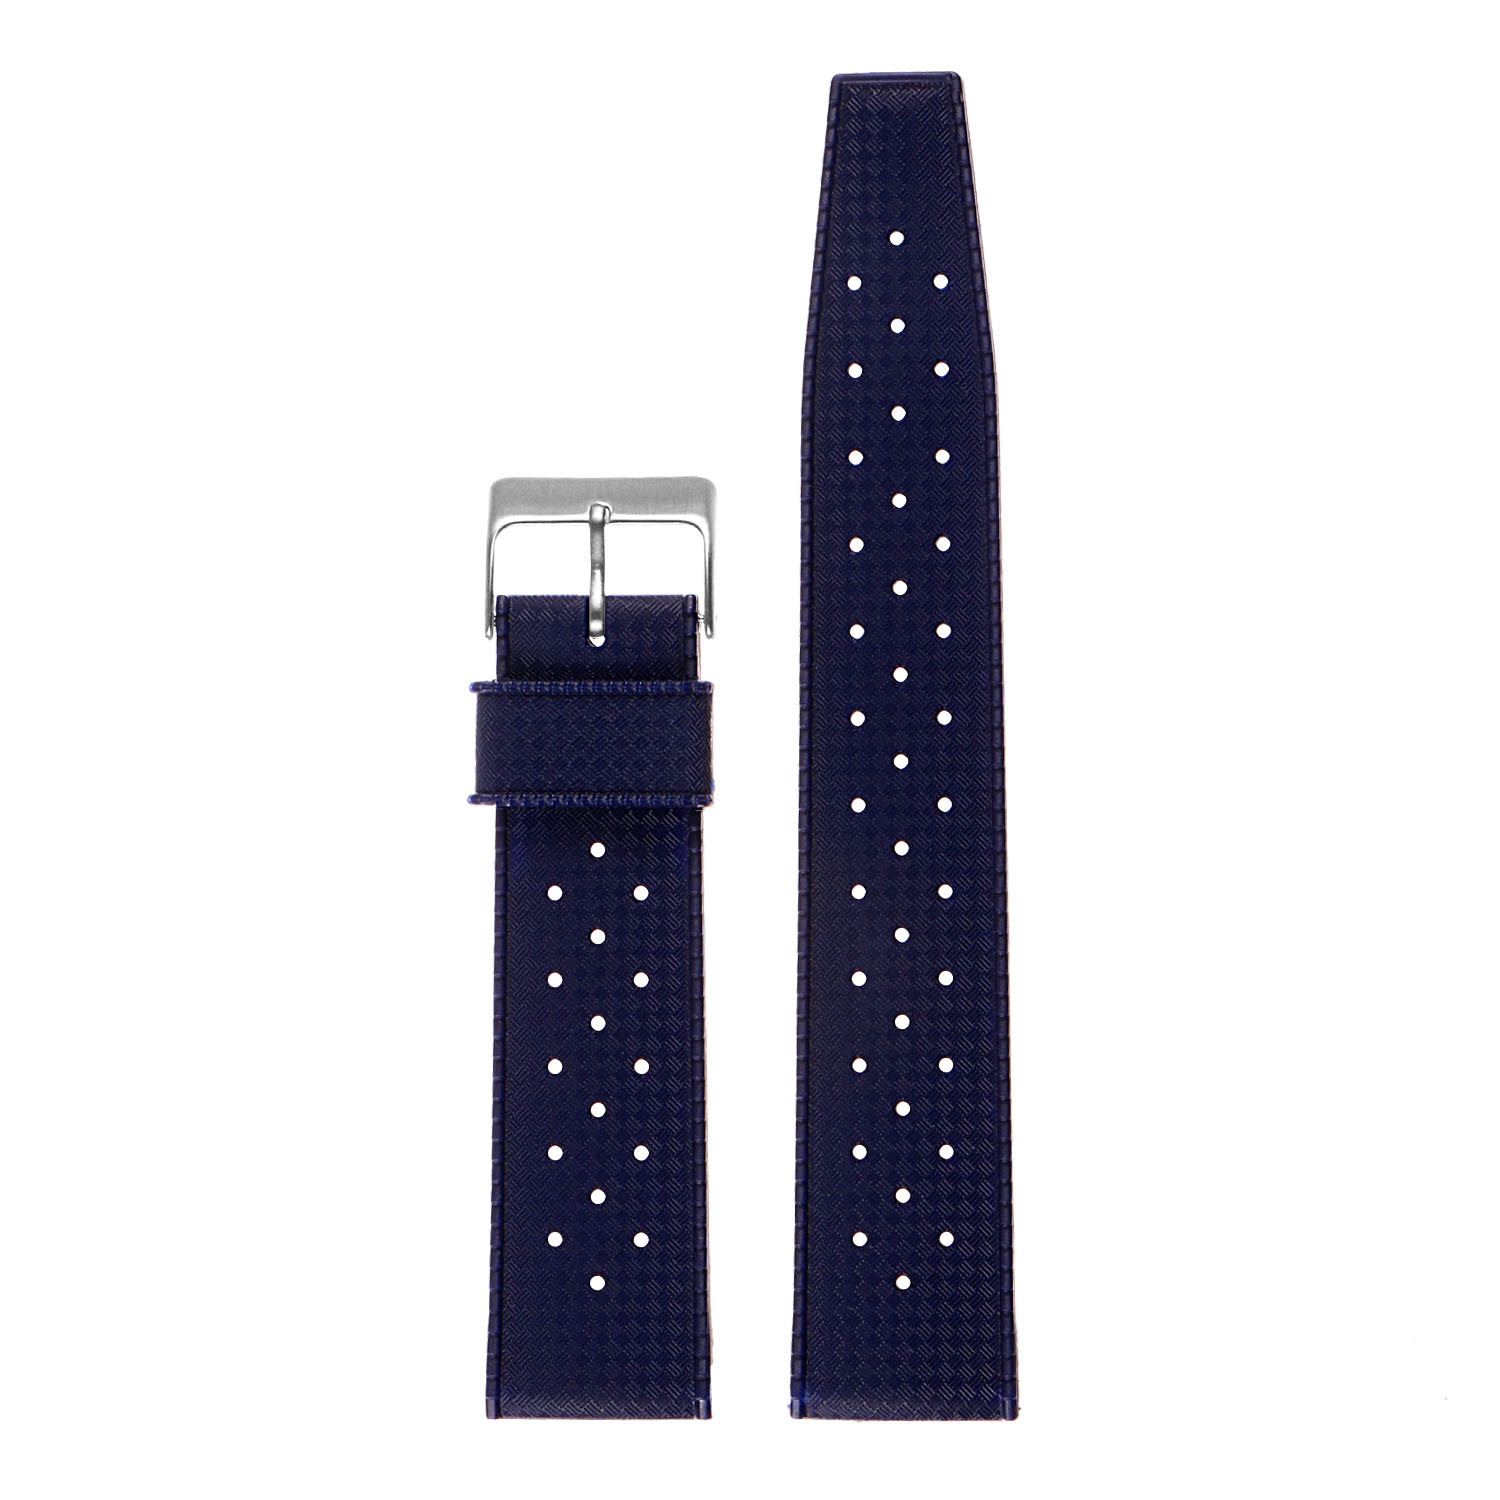 StrapsCo Vintage Style Perforated Rubber Rally Watch Band Strap for Samsung Galaxy Watch 3 - 20mm - For 41mm Galaxy Watch3 - Navy Blue